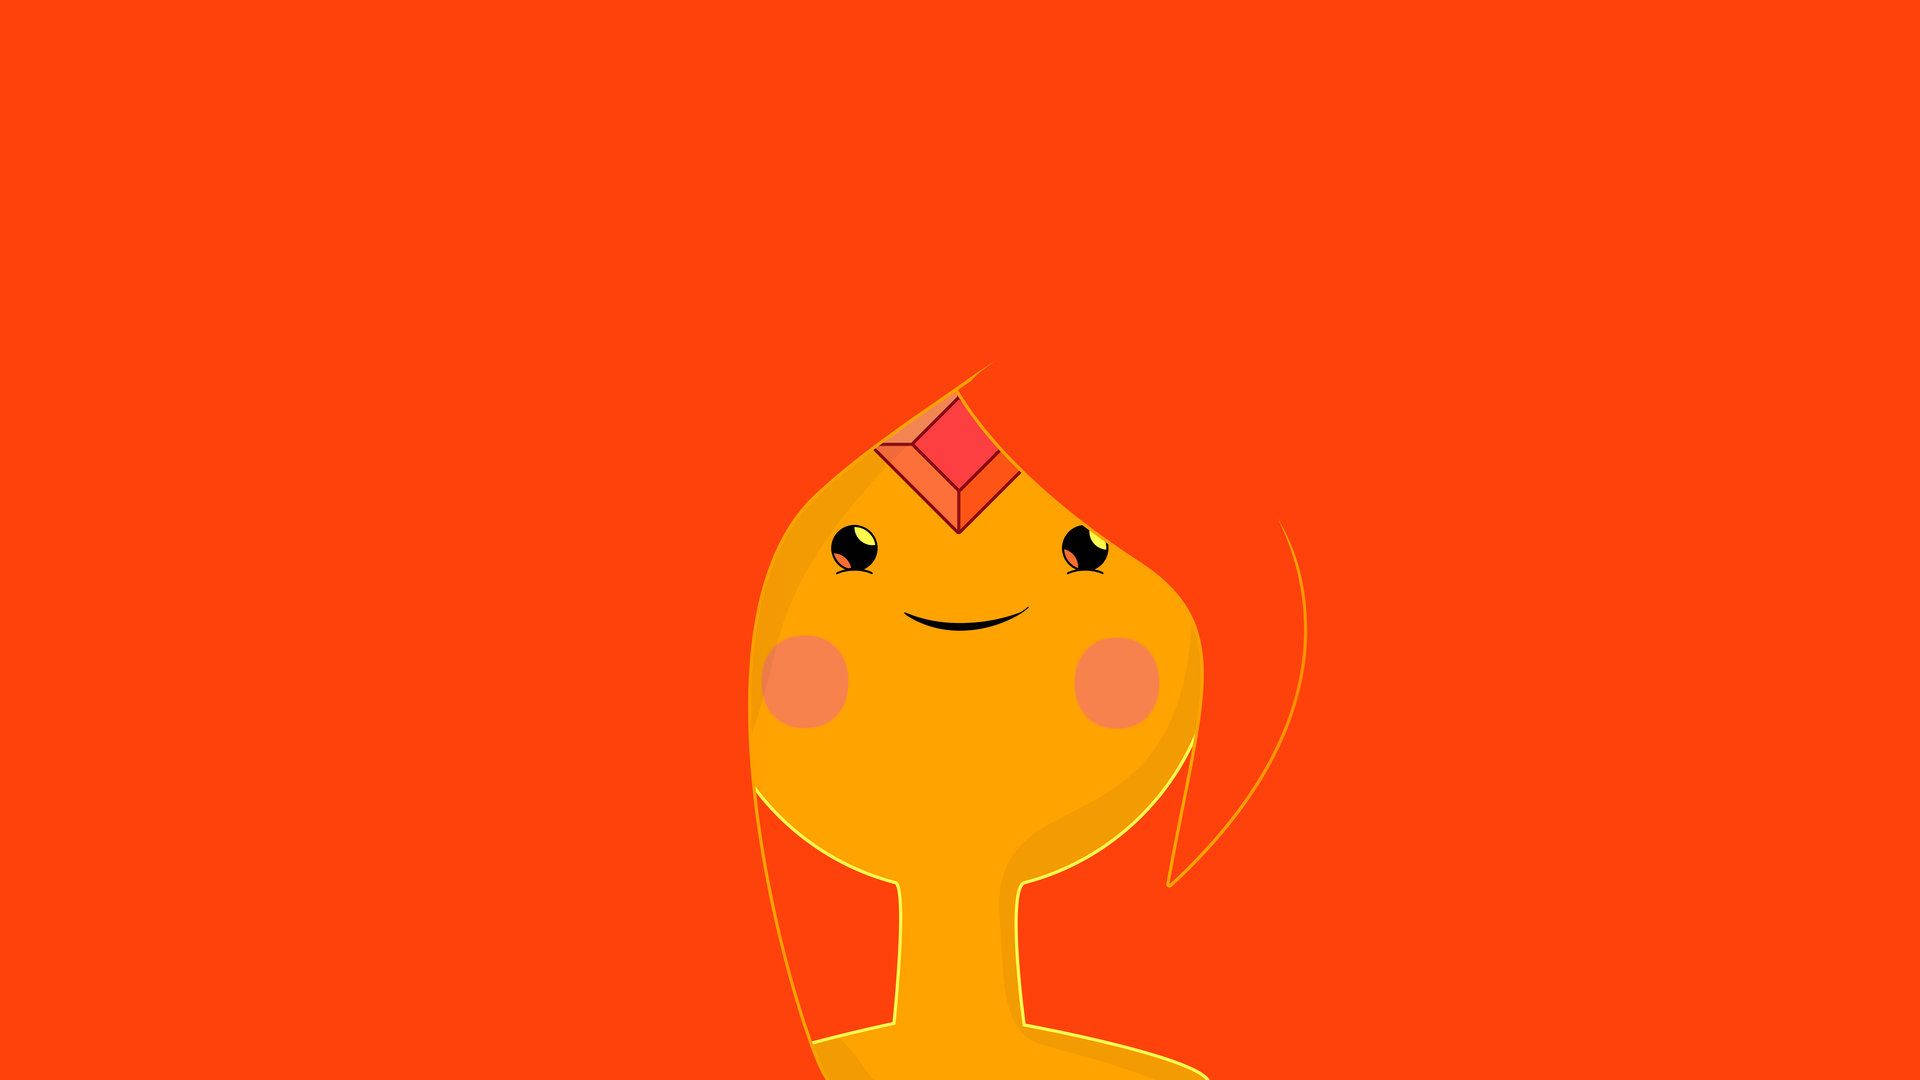 “Flame Princess Smiles in Adventure Time” Wallpaper